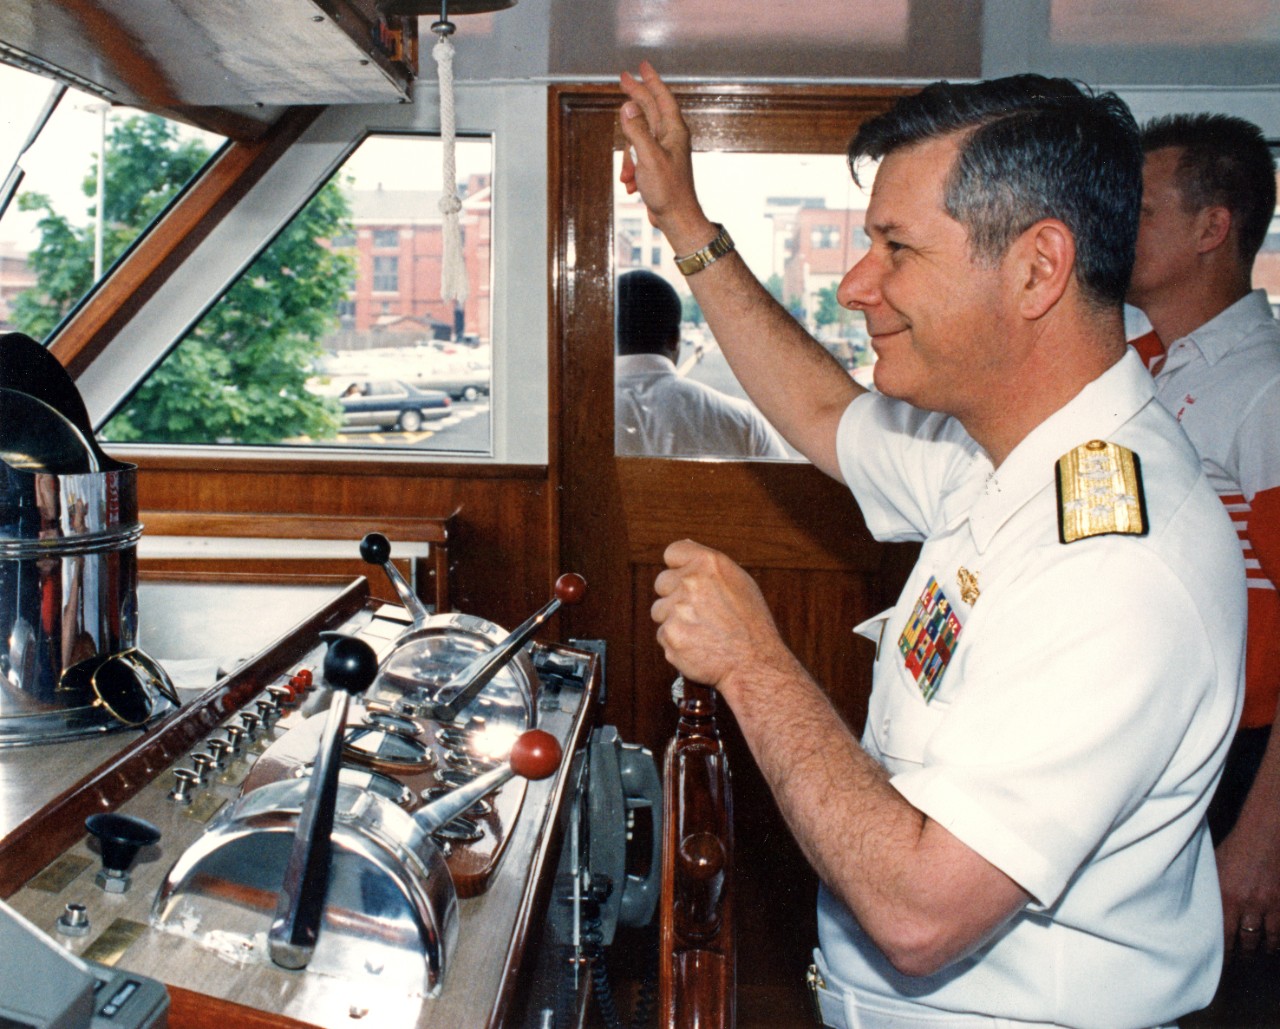 Chief of Naval Operations, Admiral Jeremy "Mike" Boorda, at the helm of the CNO barge Chesapeake, off the Washington Navy Yard.